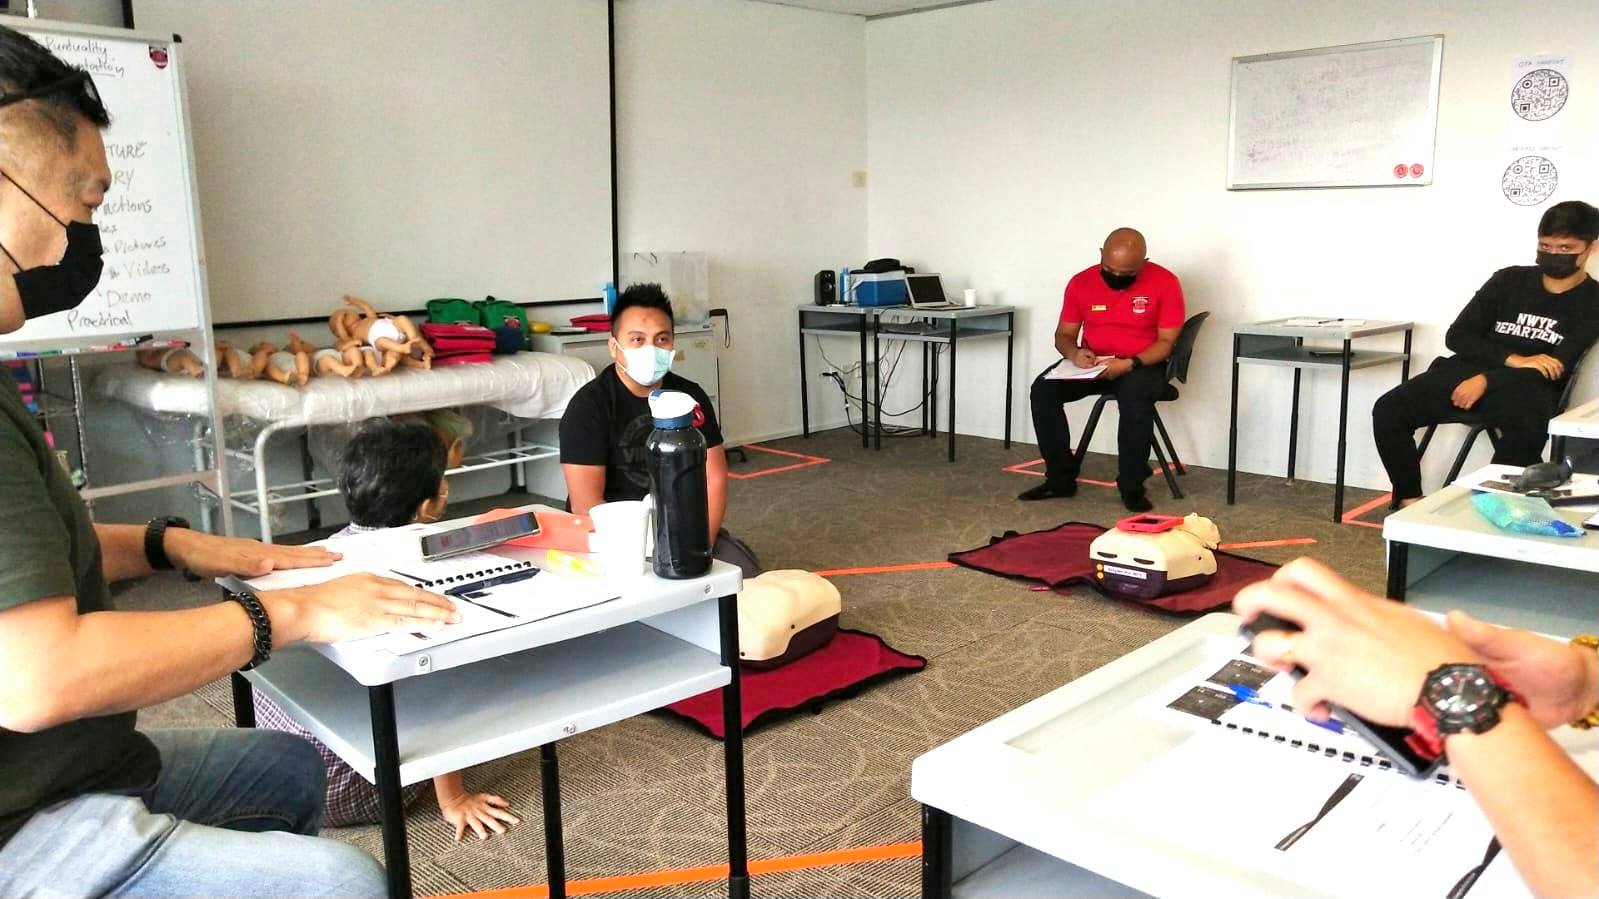 Occupational First Aid Refresher Course (2.5 Full Days)